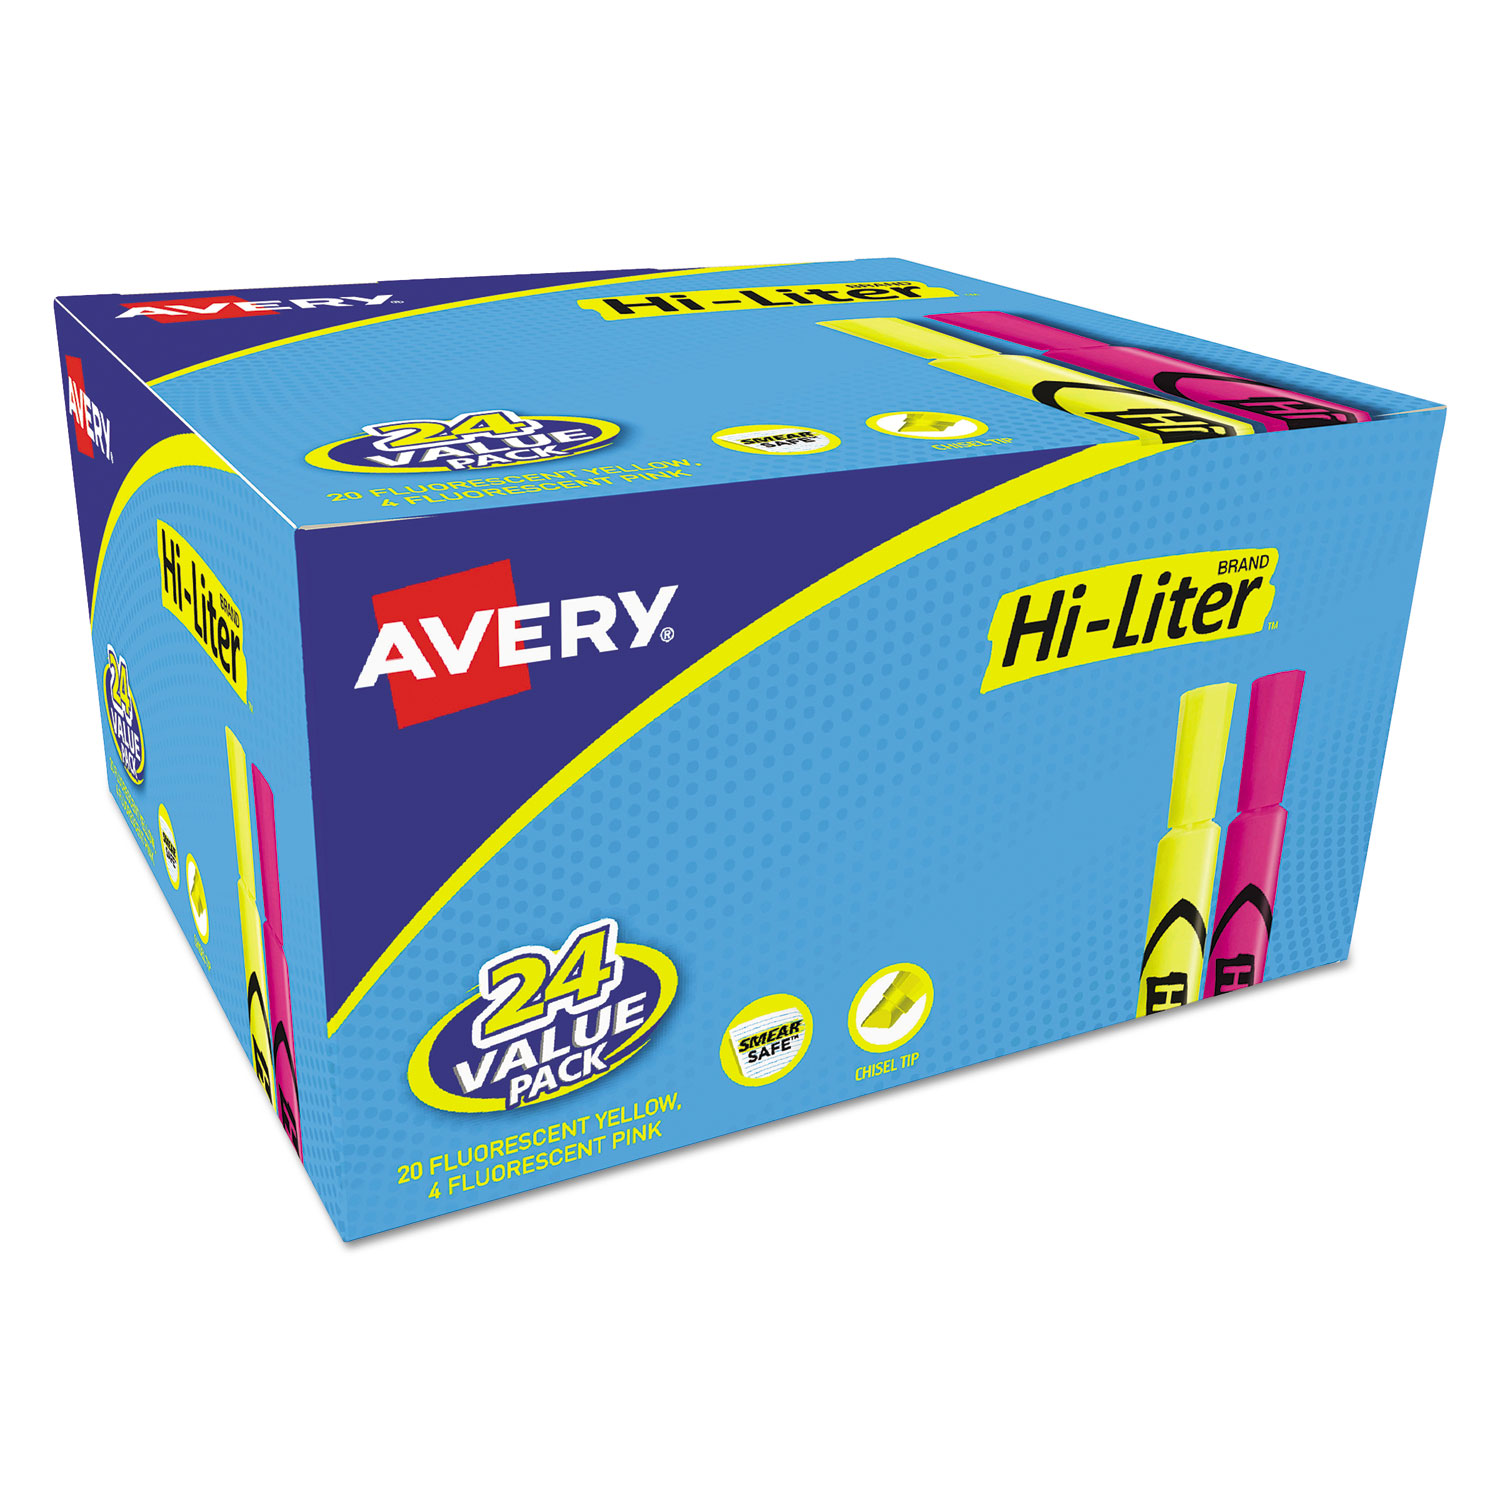  Avery 98189 HI-LITER Desk-Style Highlighters, Chisel Tip, Assorted Colors, 24/Pack (AVE98189) 